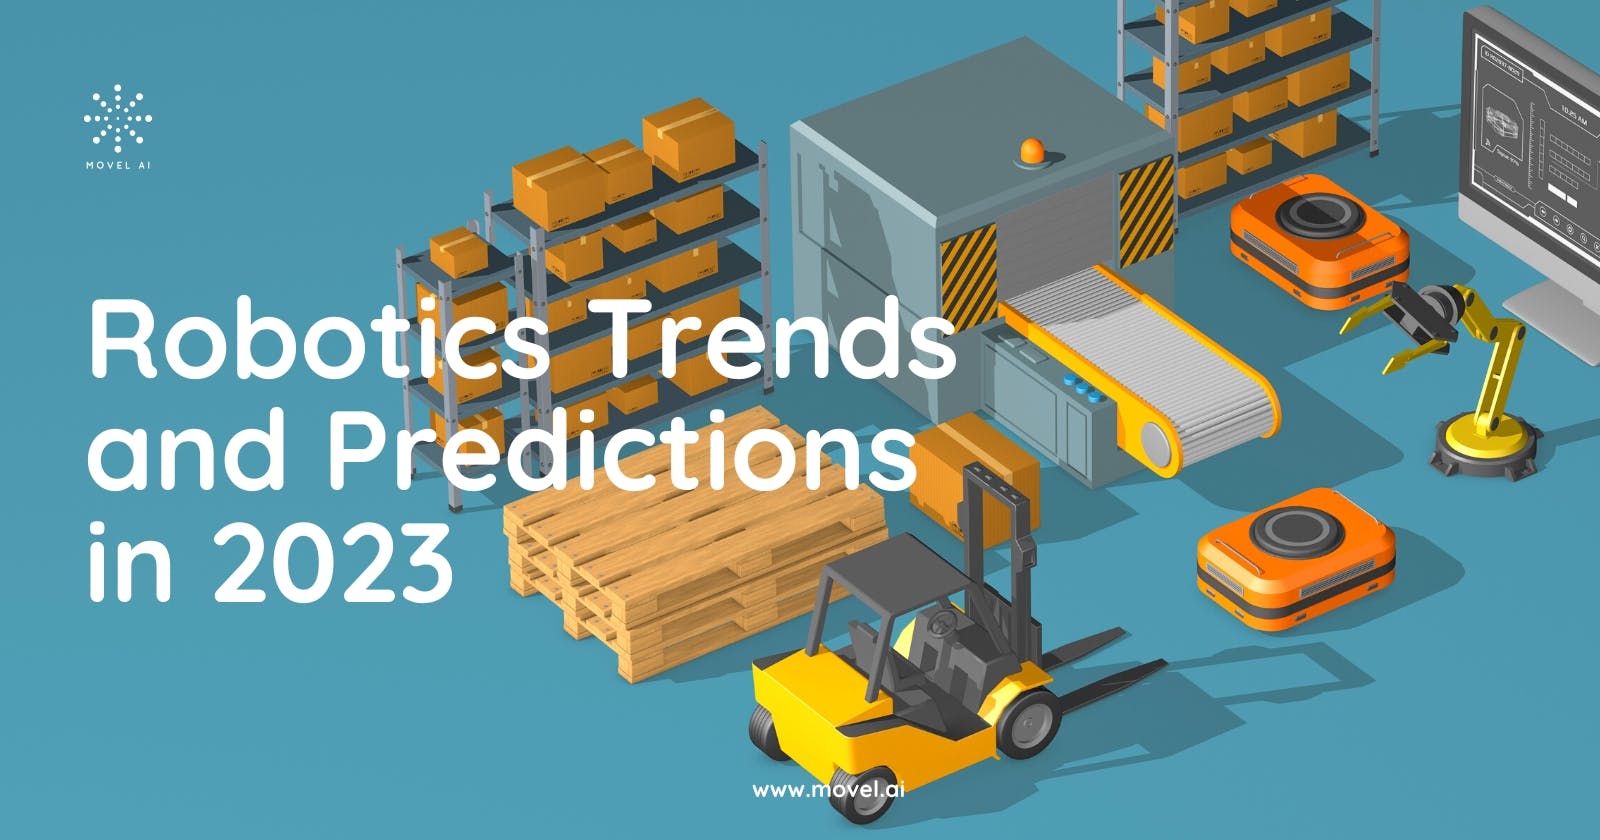 Robotics Trends and Predictions in 2023